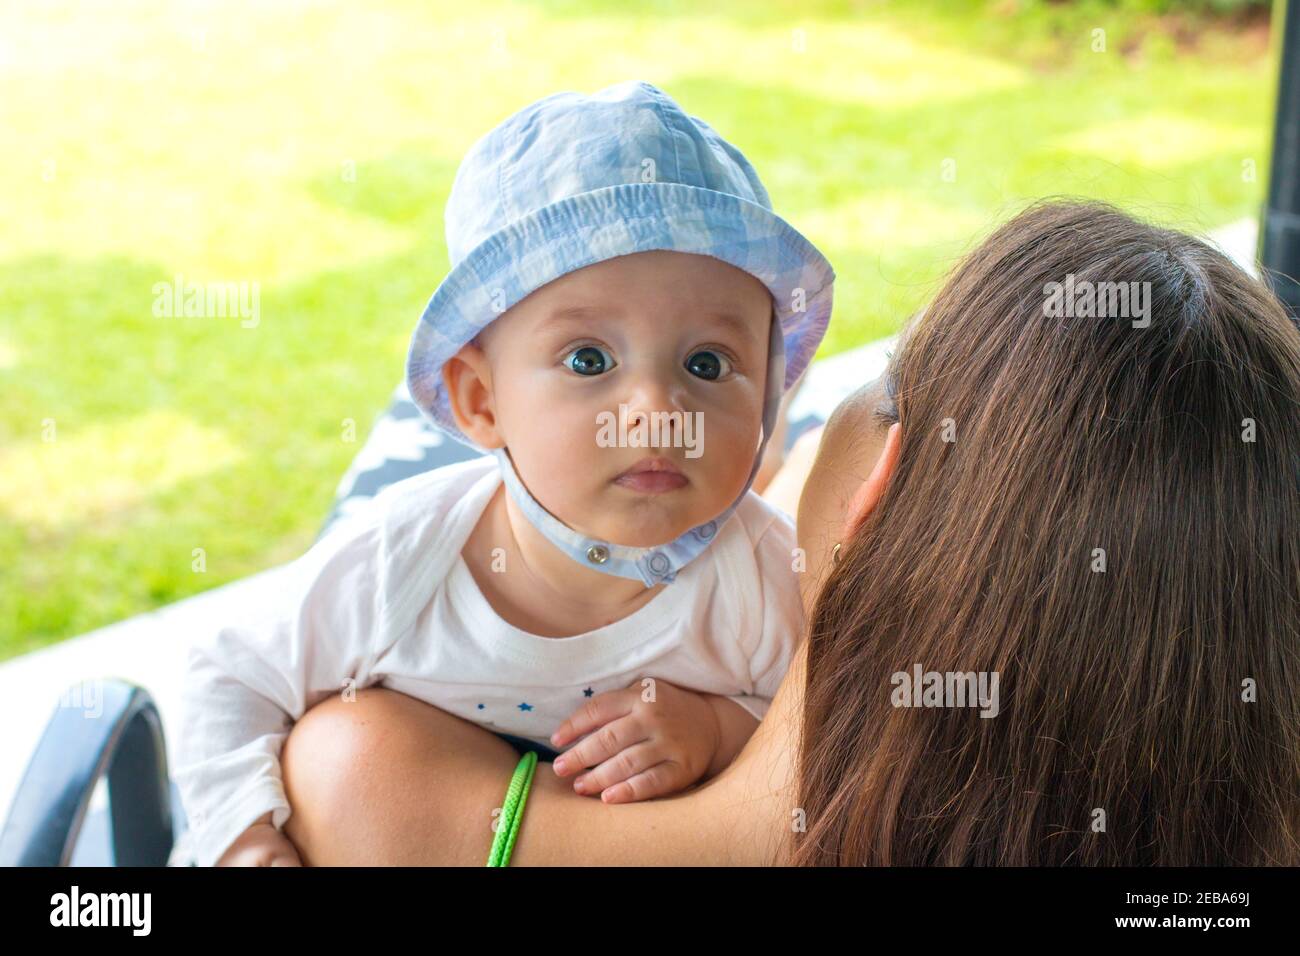 New mother and child on deckchair at backyard with green grass garden view and holding her little baby, baby boy resting on mother’s shoulder and look Stock Photo